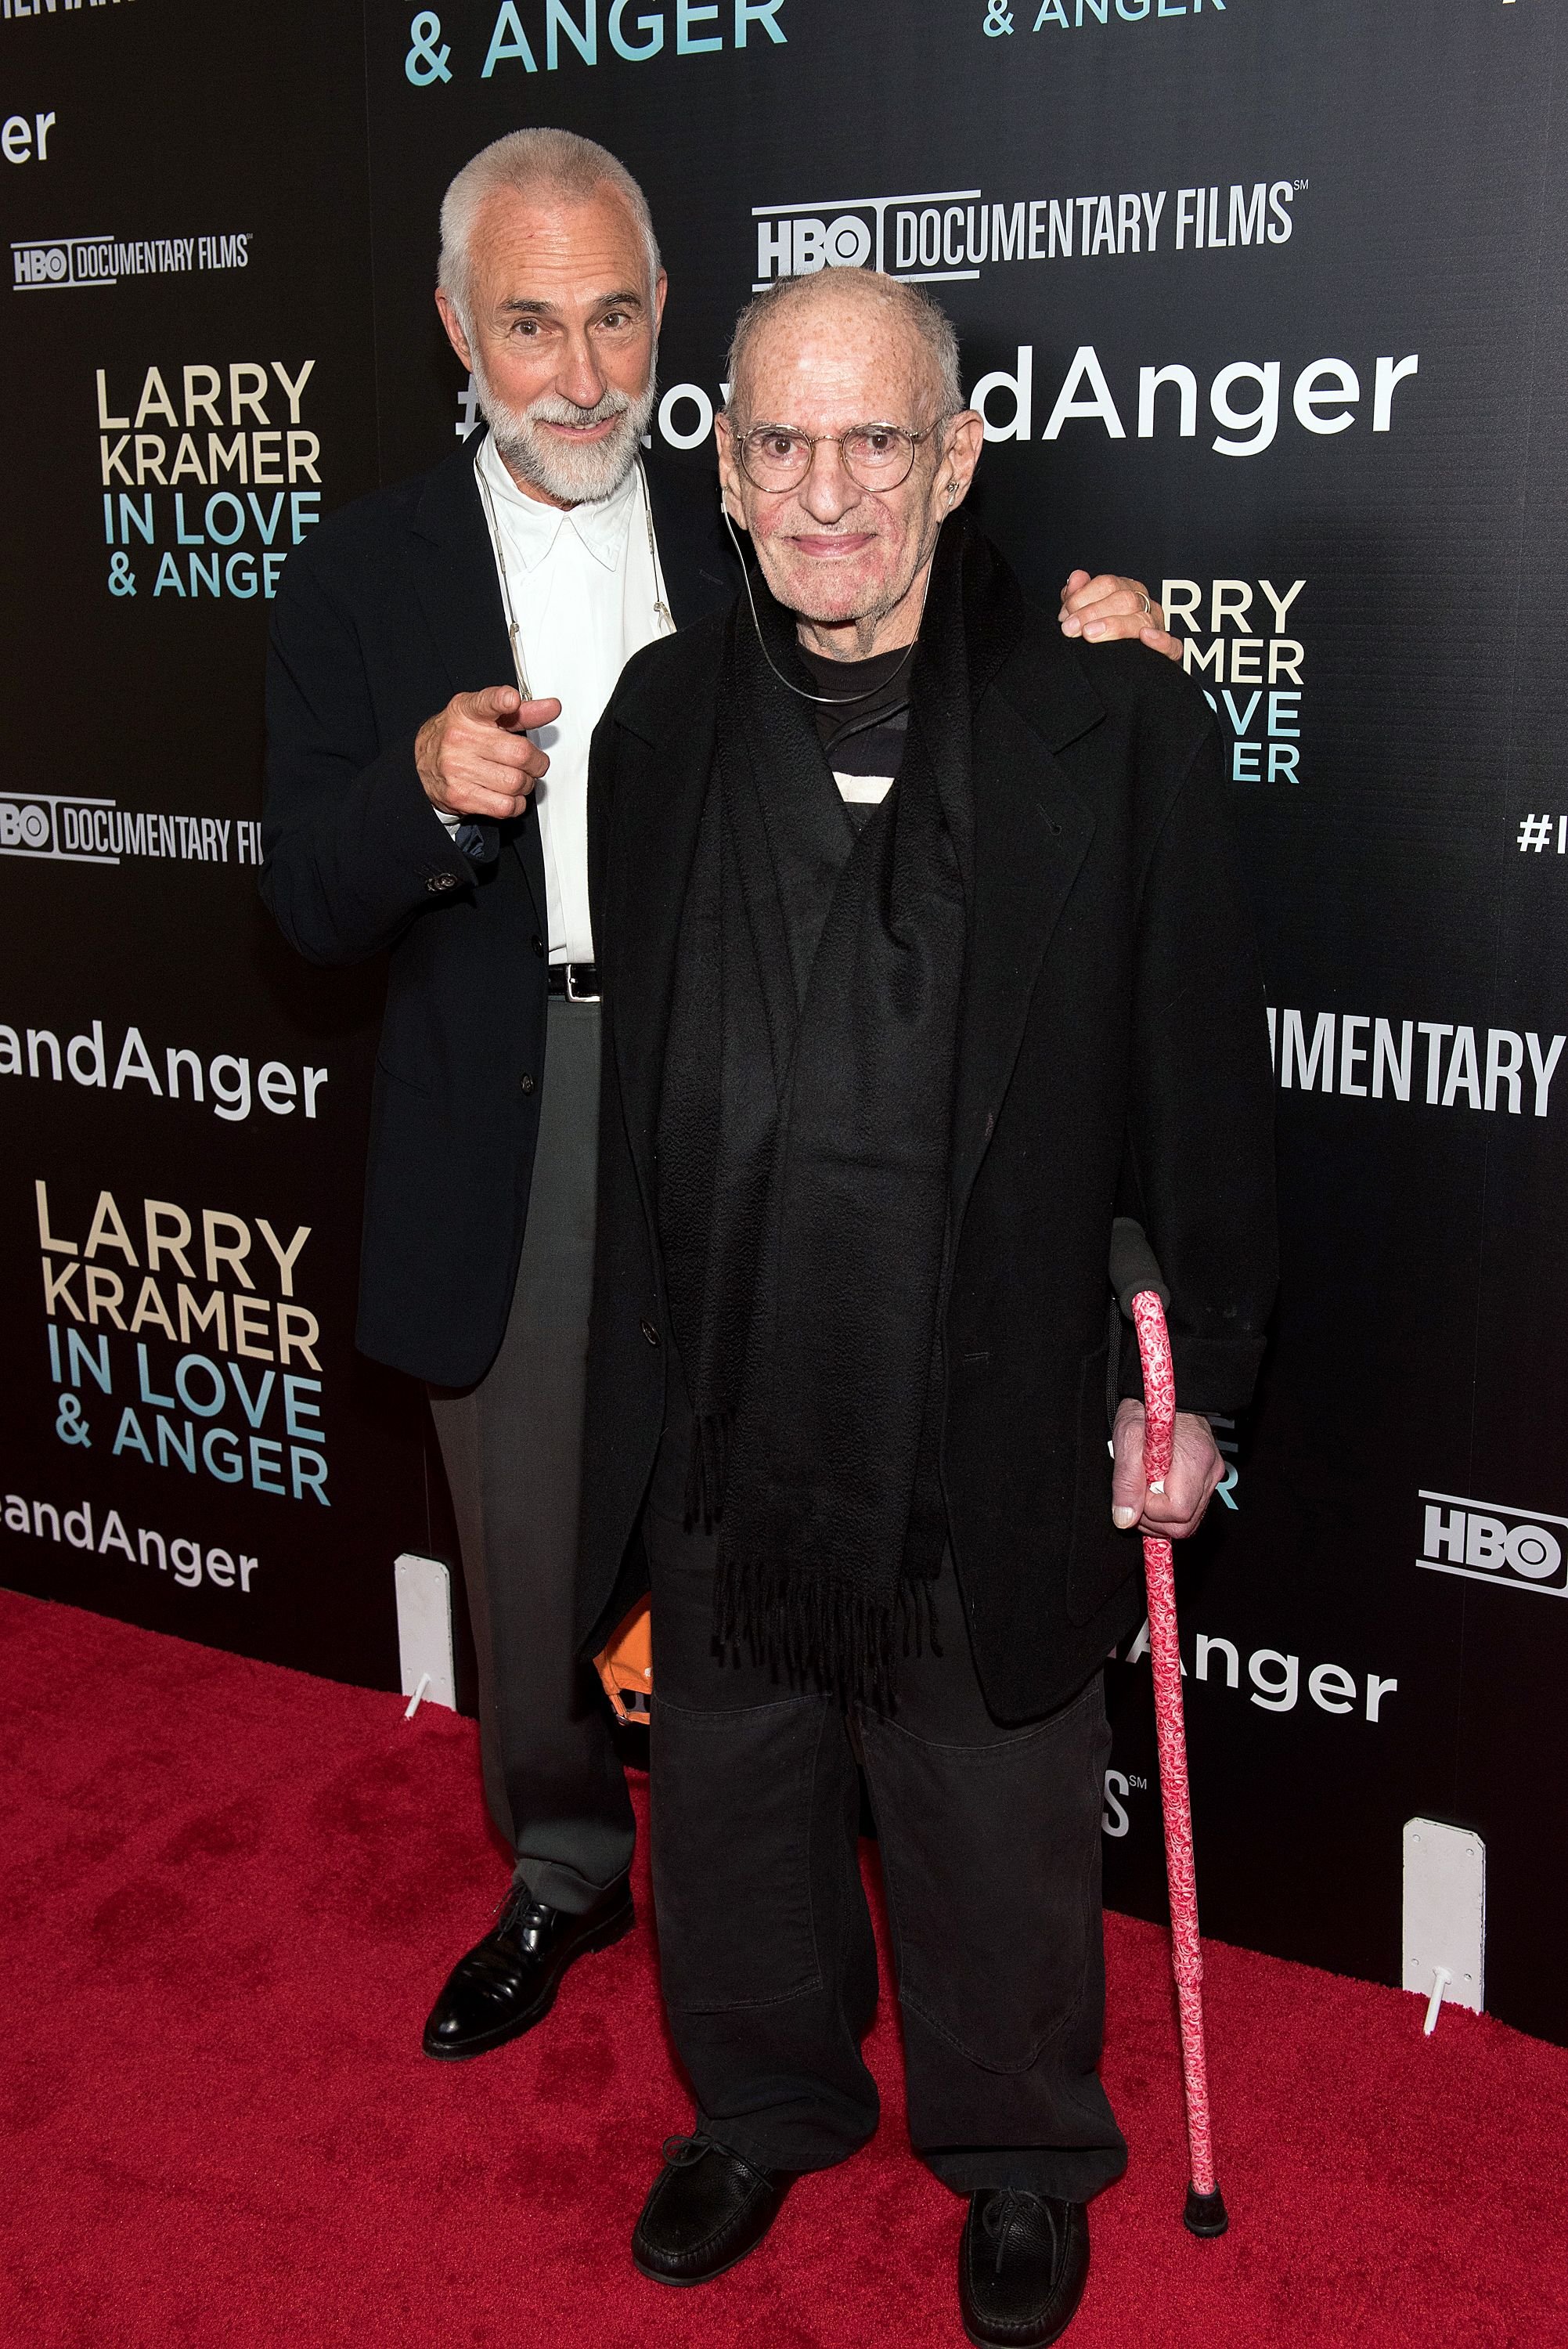 David Webster and Larry Kramer at the "Larry Kramer in Love and Anger" New York premiere on June 1, 2015, in New York City | Photo: Mike Pont/WireImage/Getty Images